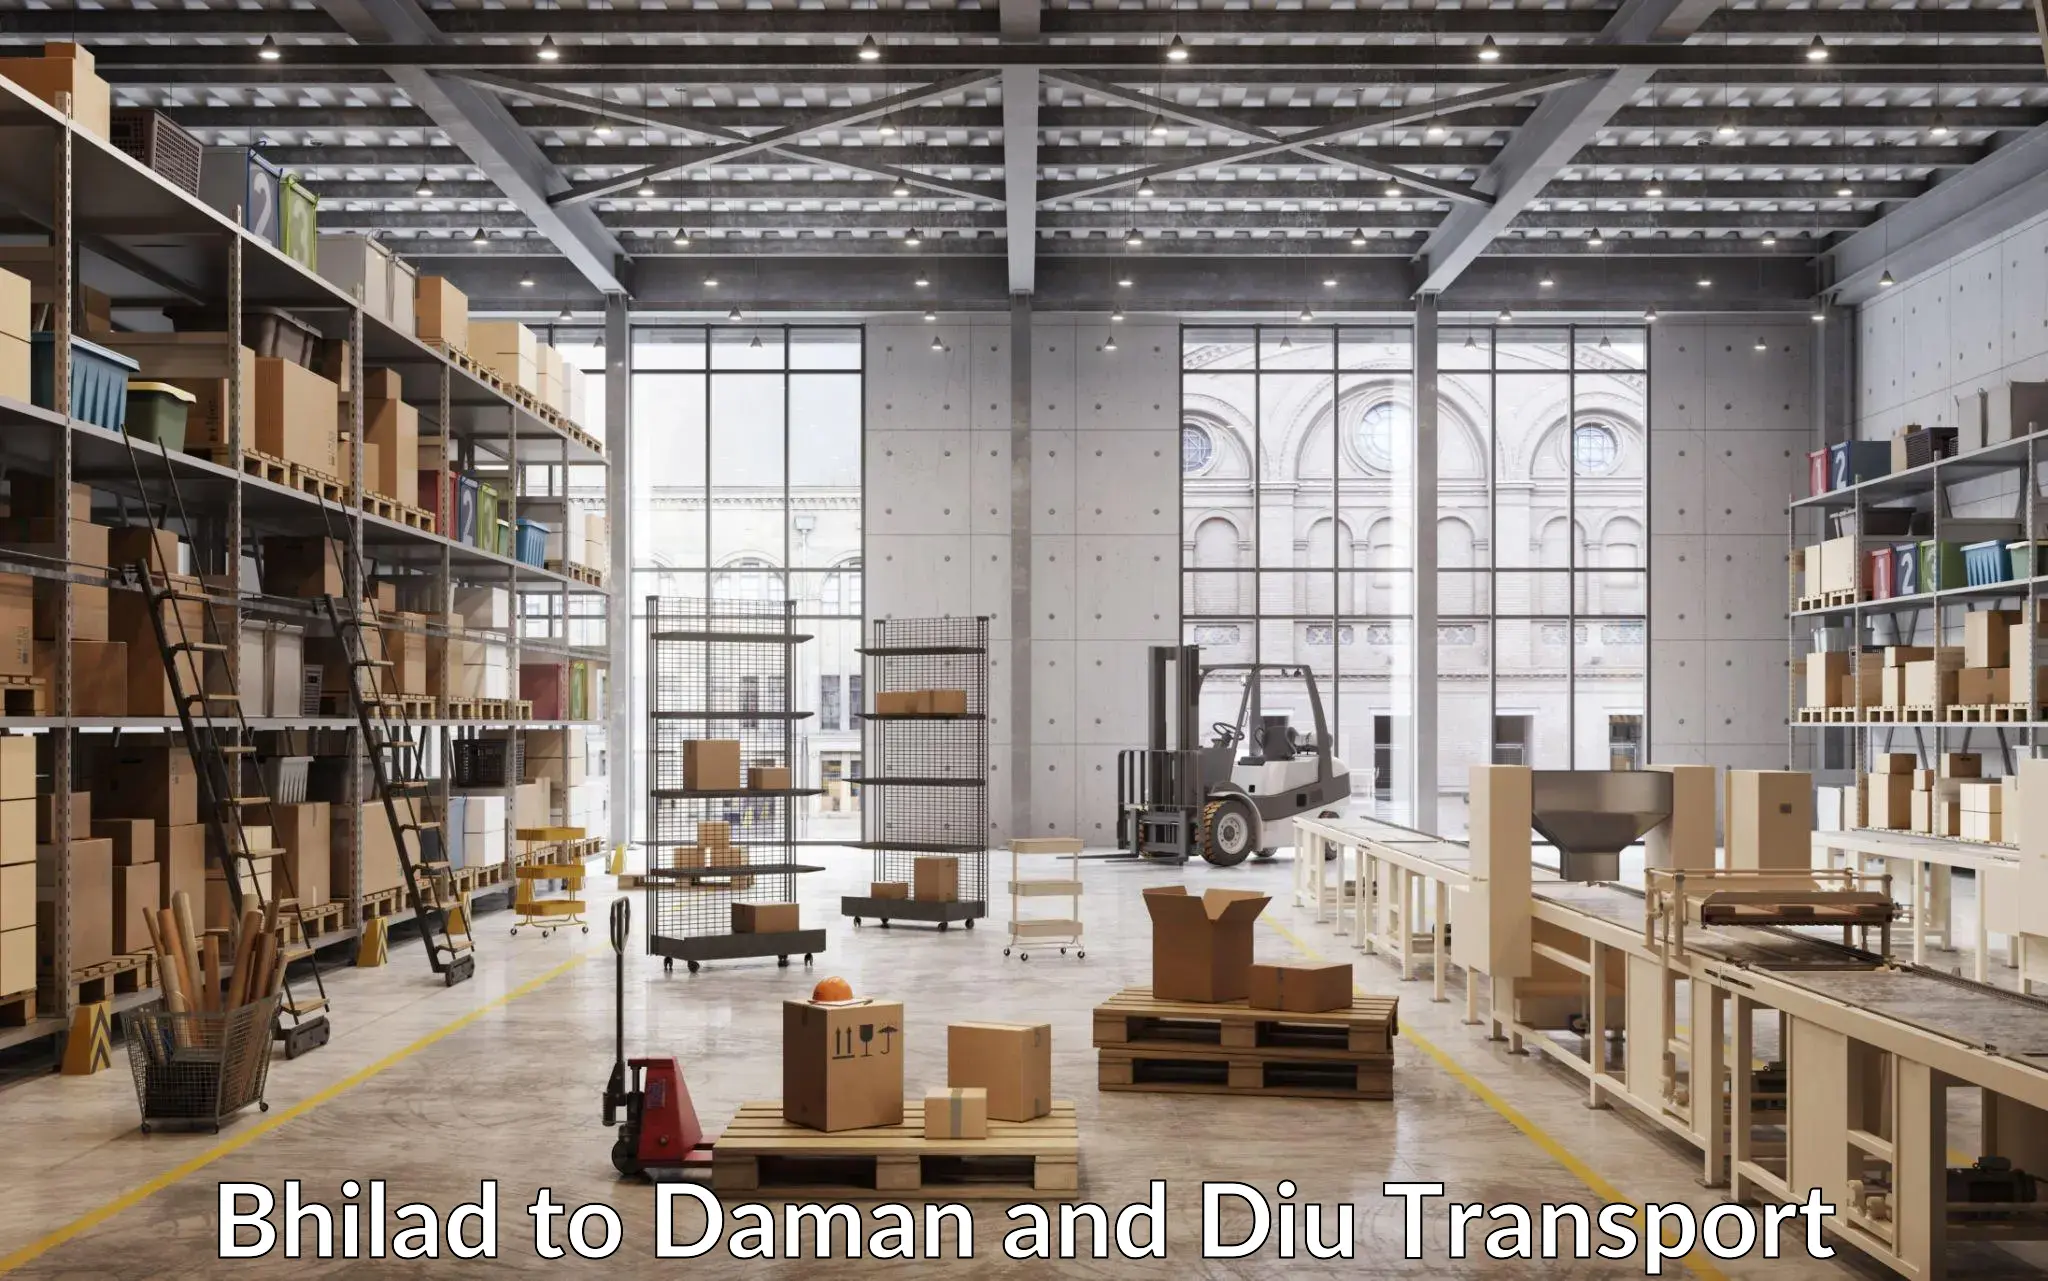 Truck transport companies in India Bhilad to Daman and Diu